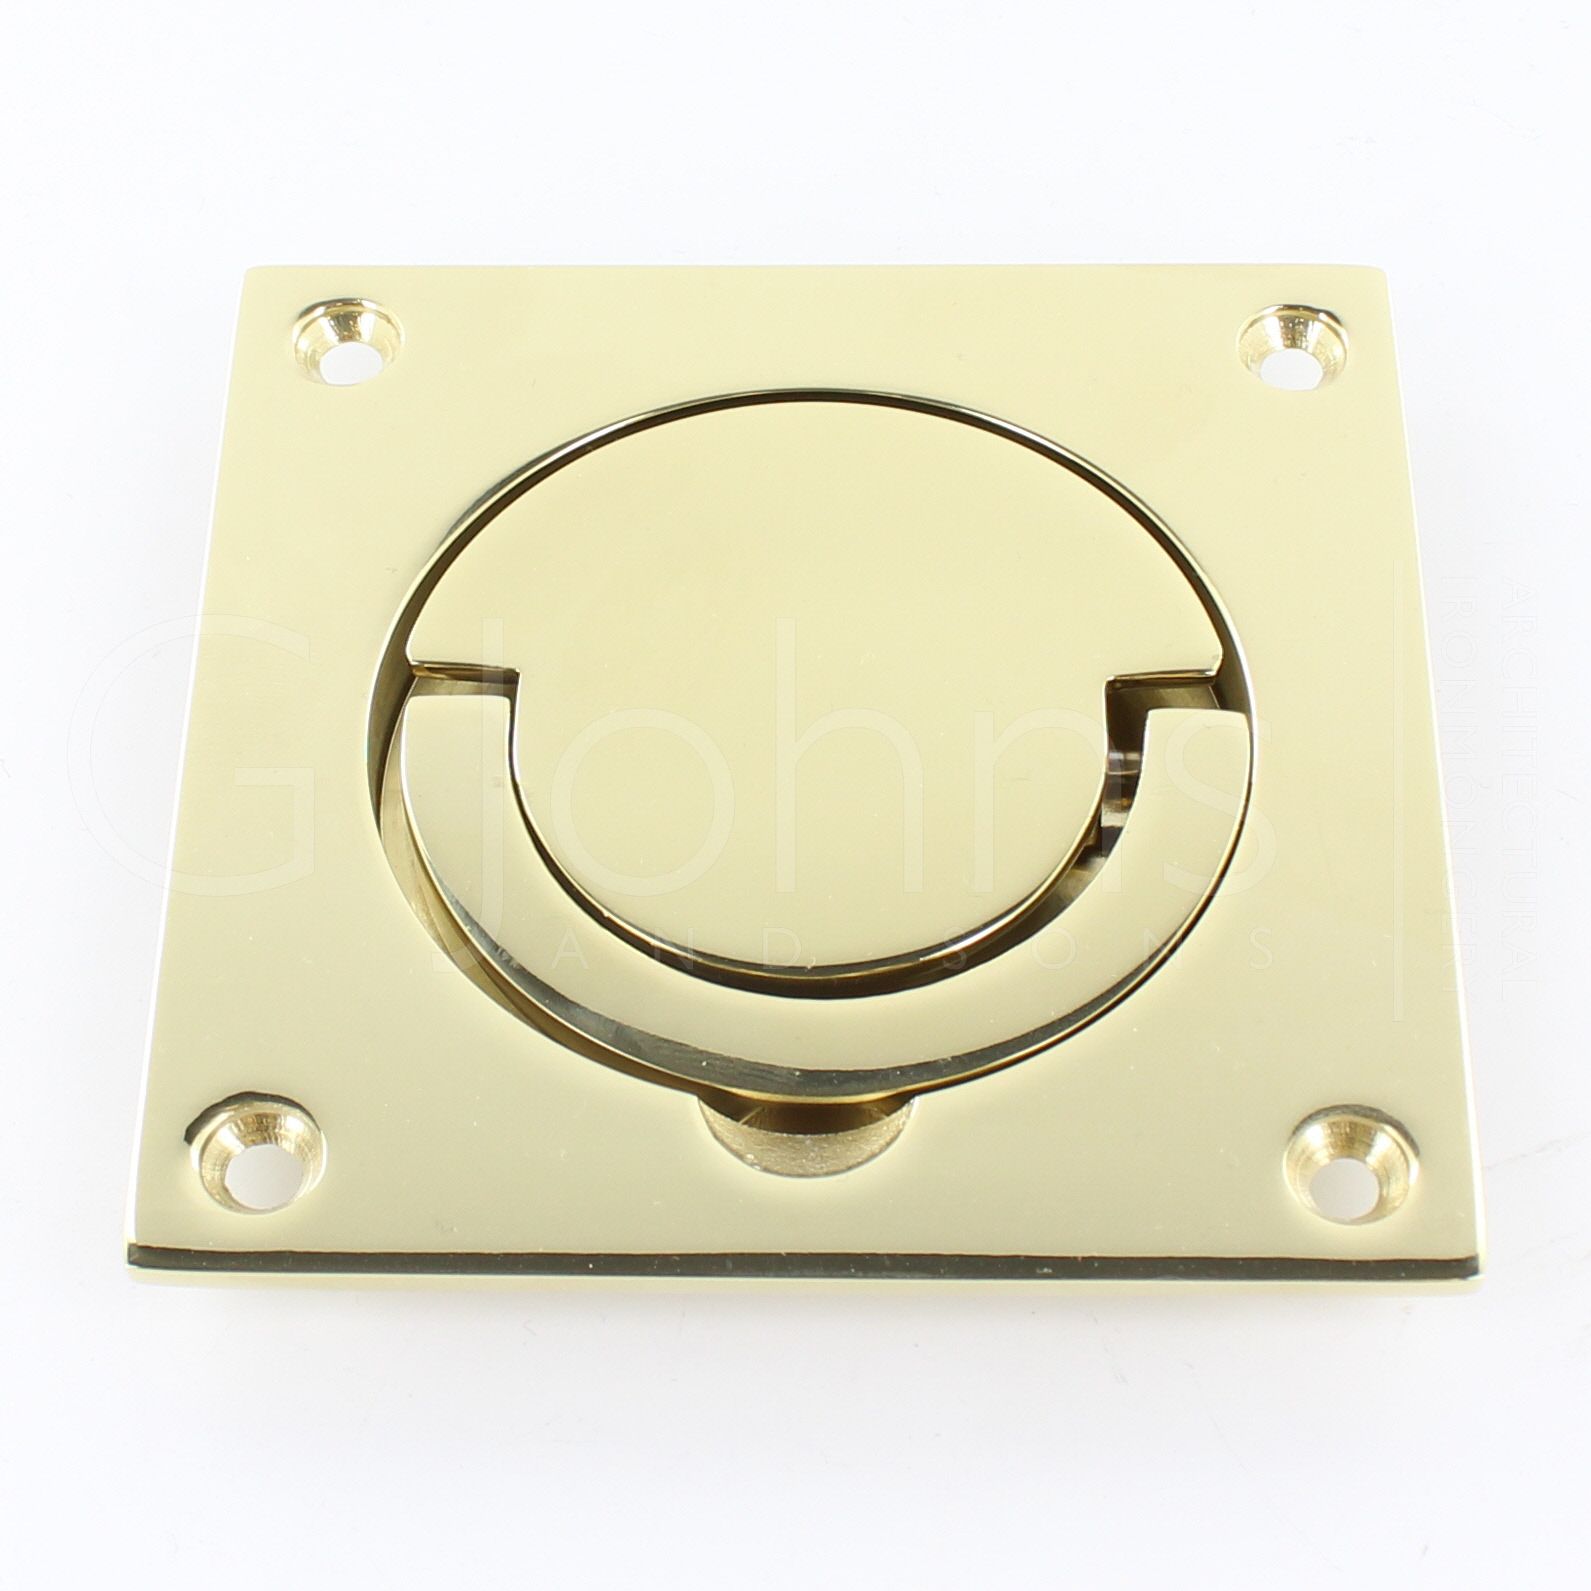 Polished Brass Plated - D'style